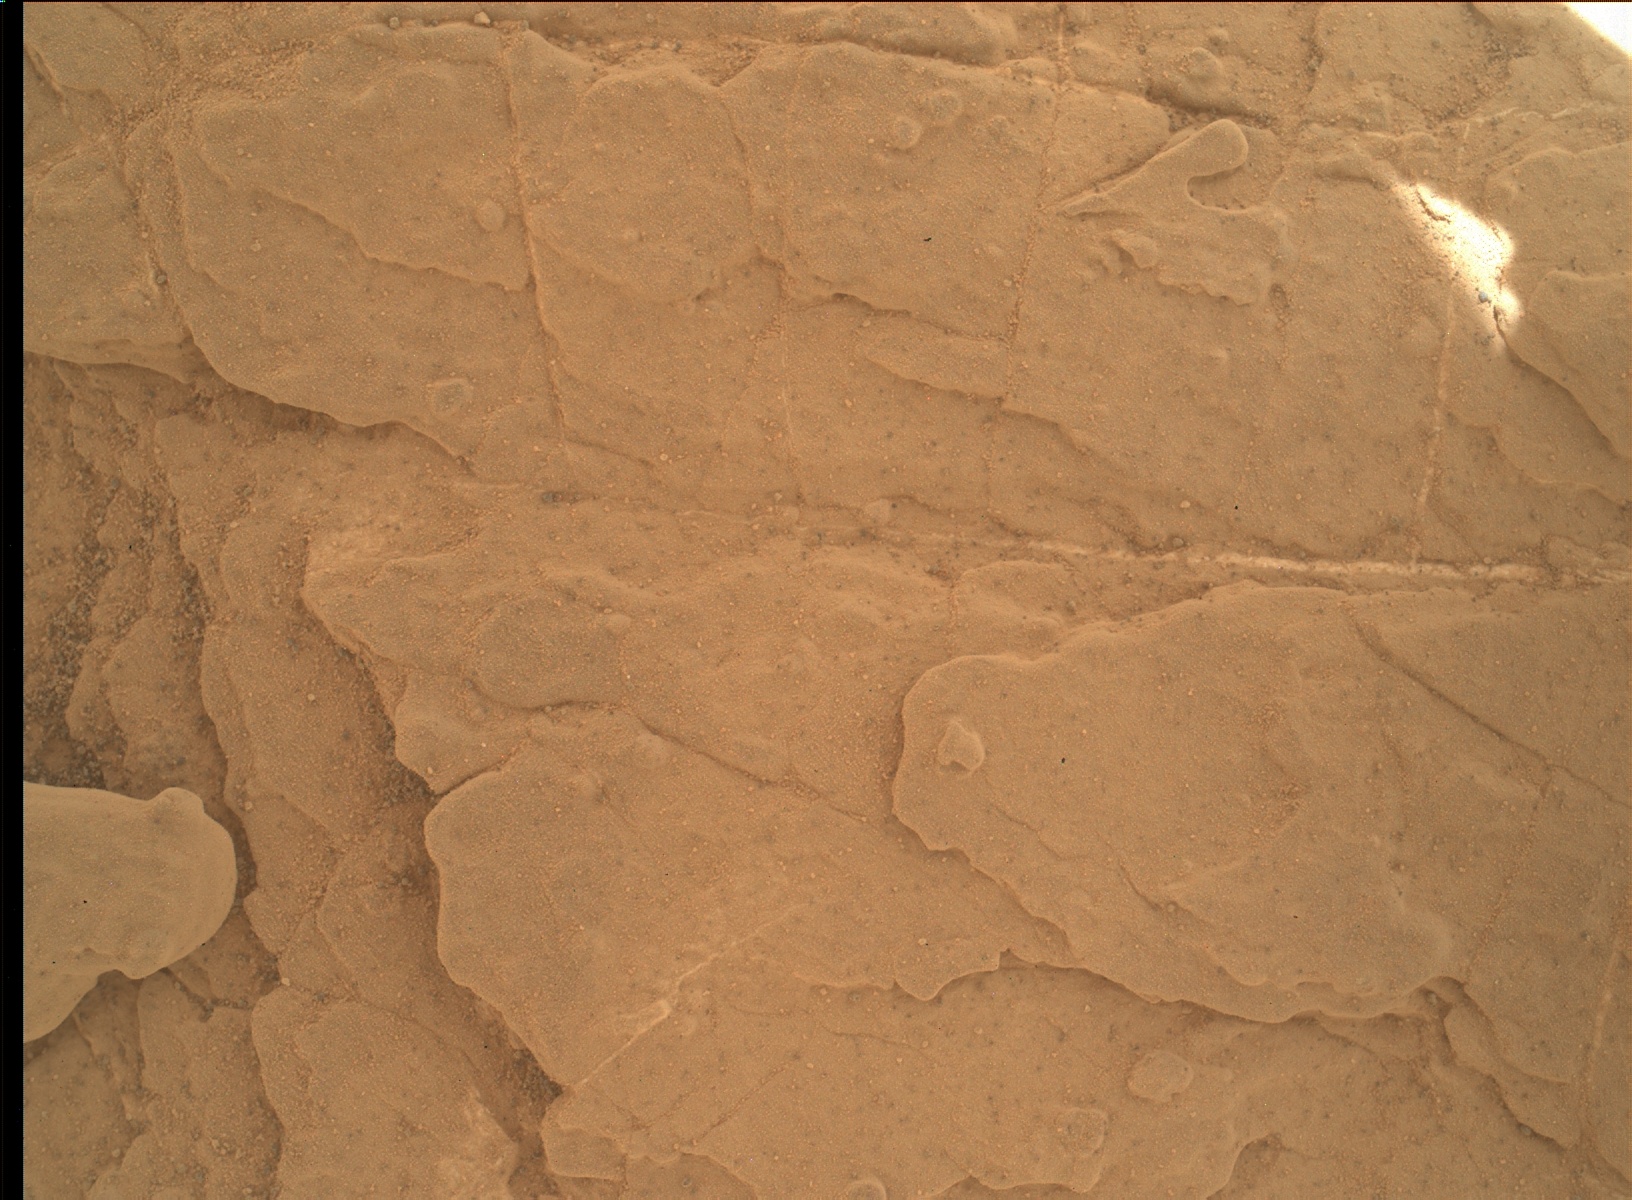 Nasa's Mars rover Curiosity acquired this image using its Mars Hand Lens Imager (MAHLI) on Sol 2606